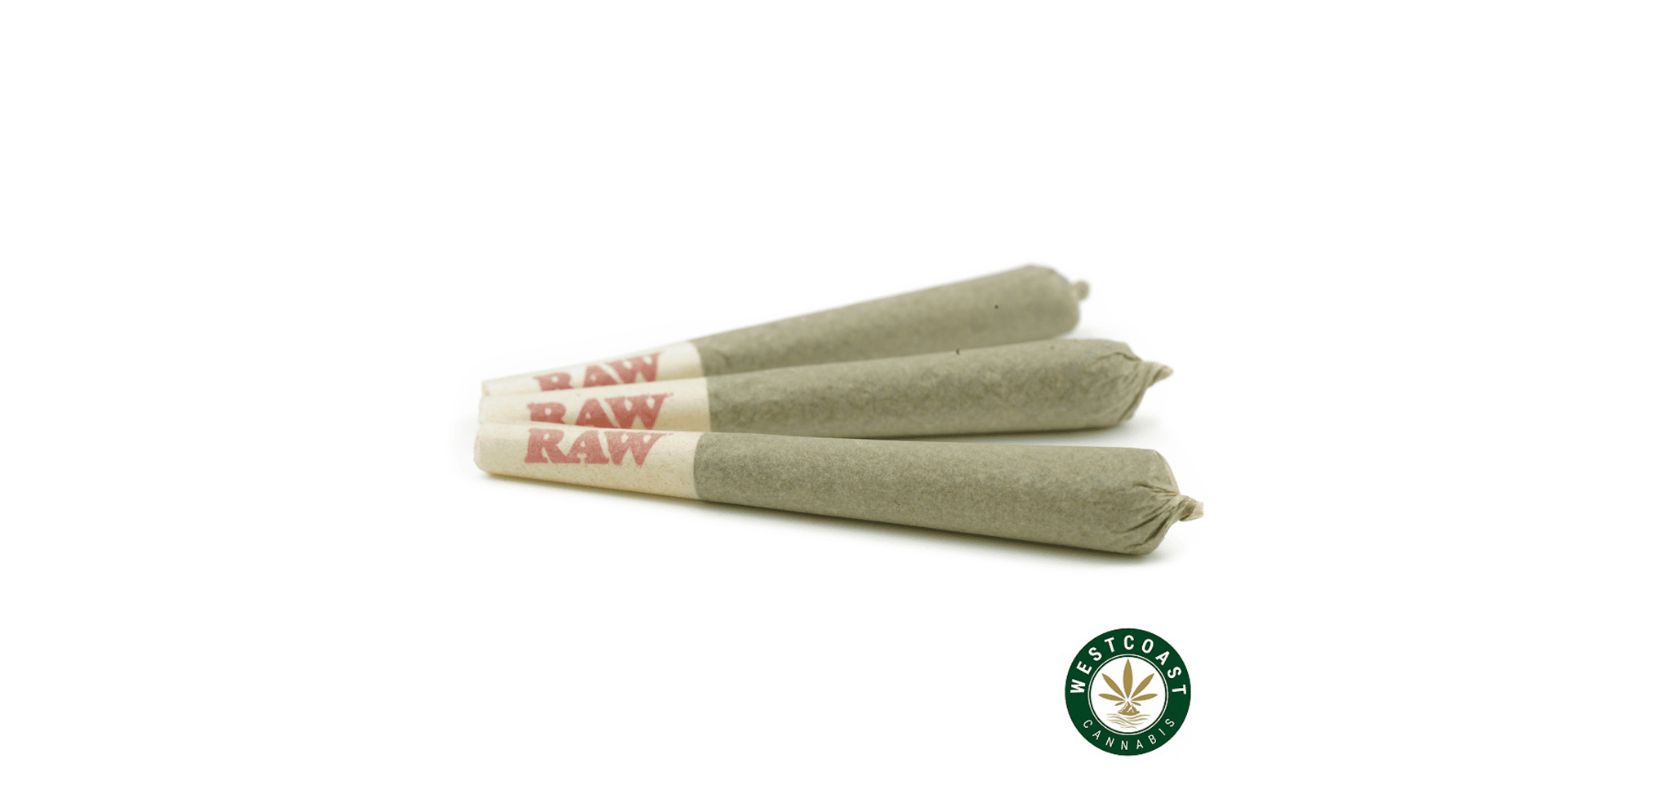 These Pre-Rolls taste amazing and the smoke is extra-smooth. They're rolled to perfection, and all you need to do is light one up - you'll save a bunch of time and money! 